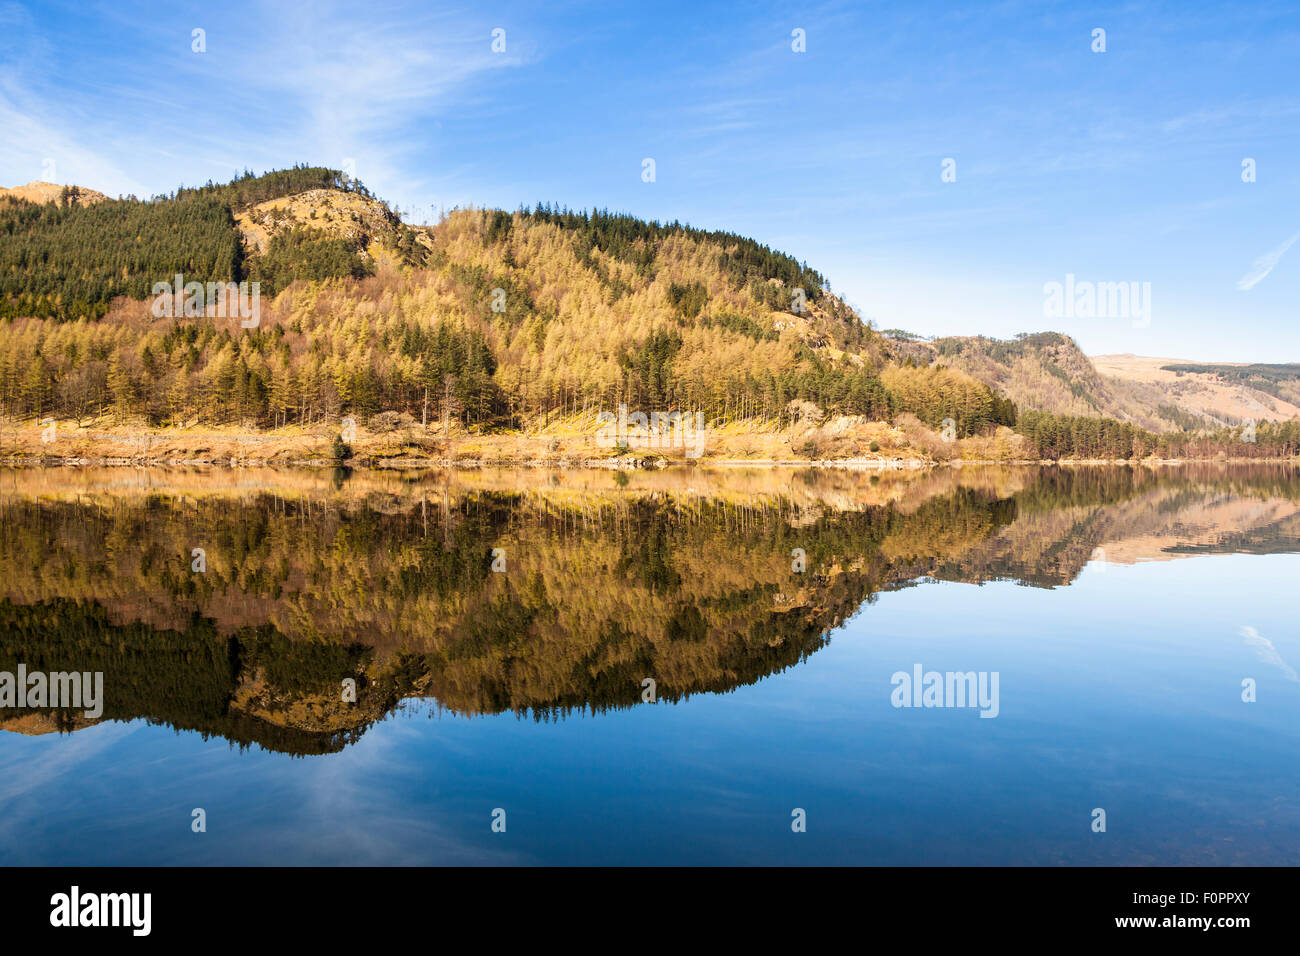 Lakeland hills reflecting on the still water of Thirlmere Reservoir, Lake District National Park, Cumbria, England Stock Photo